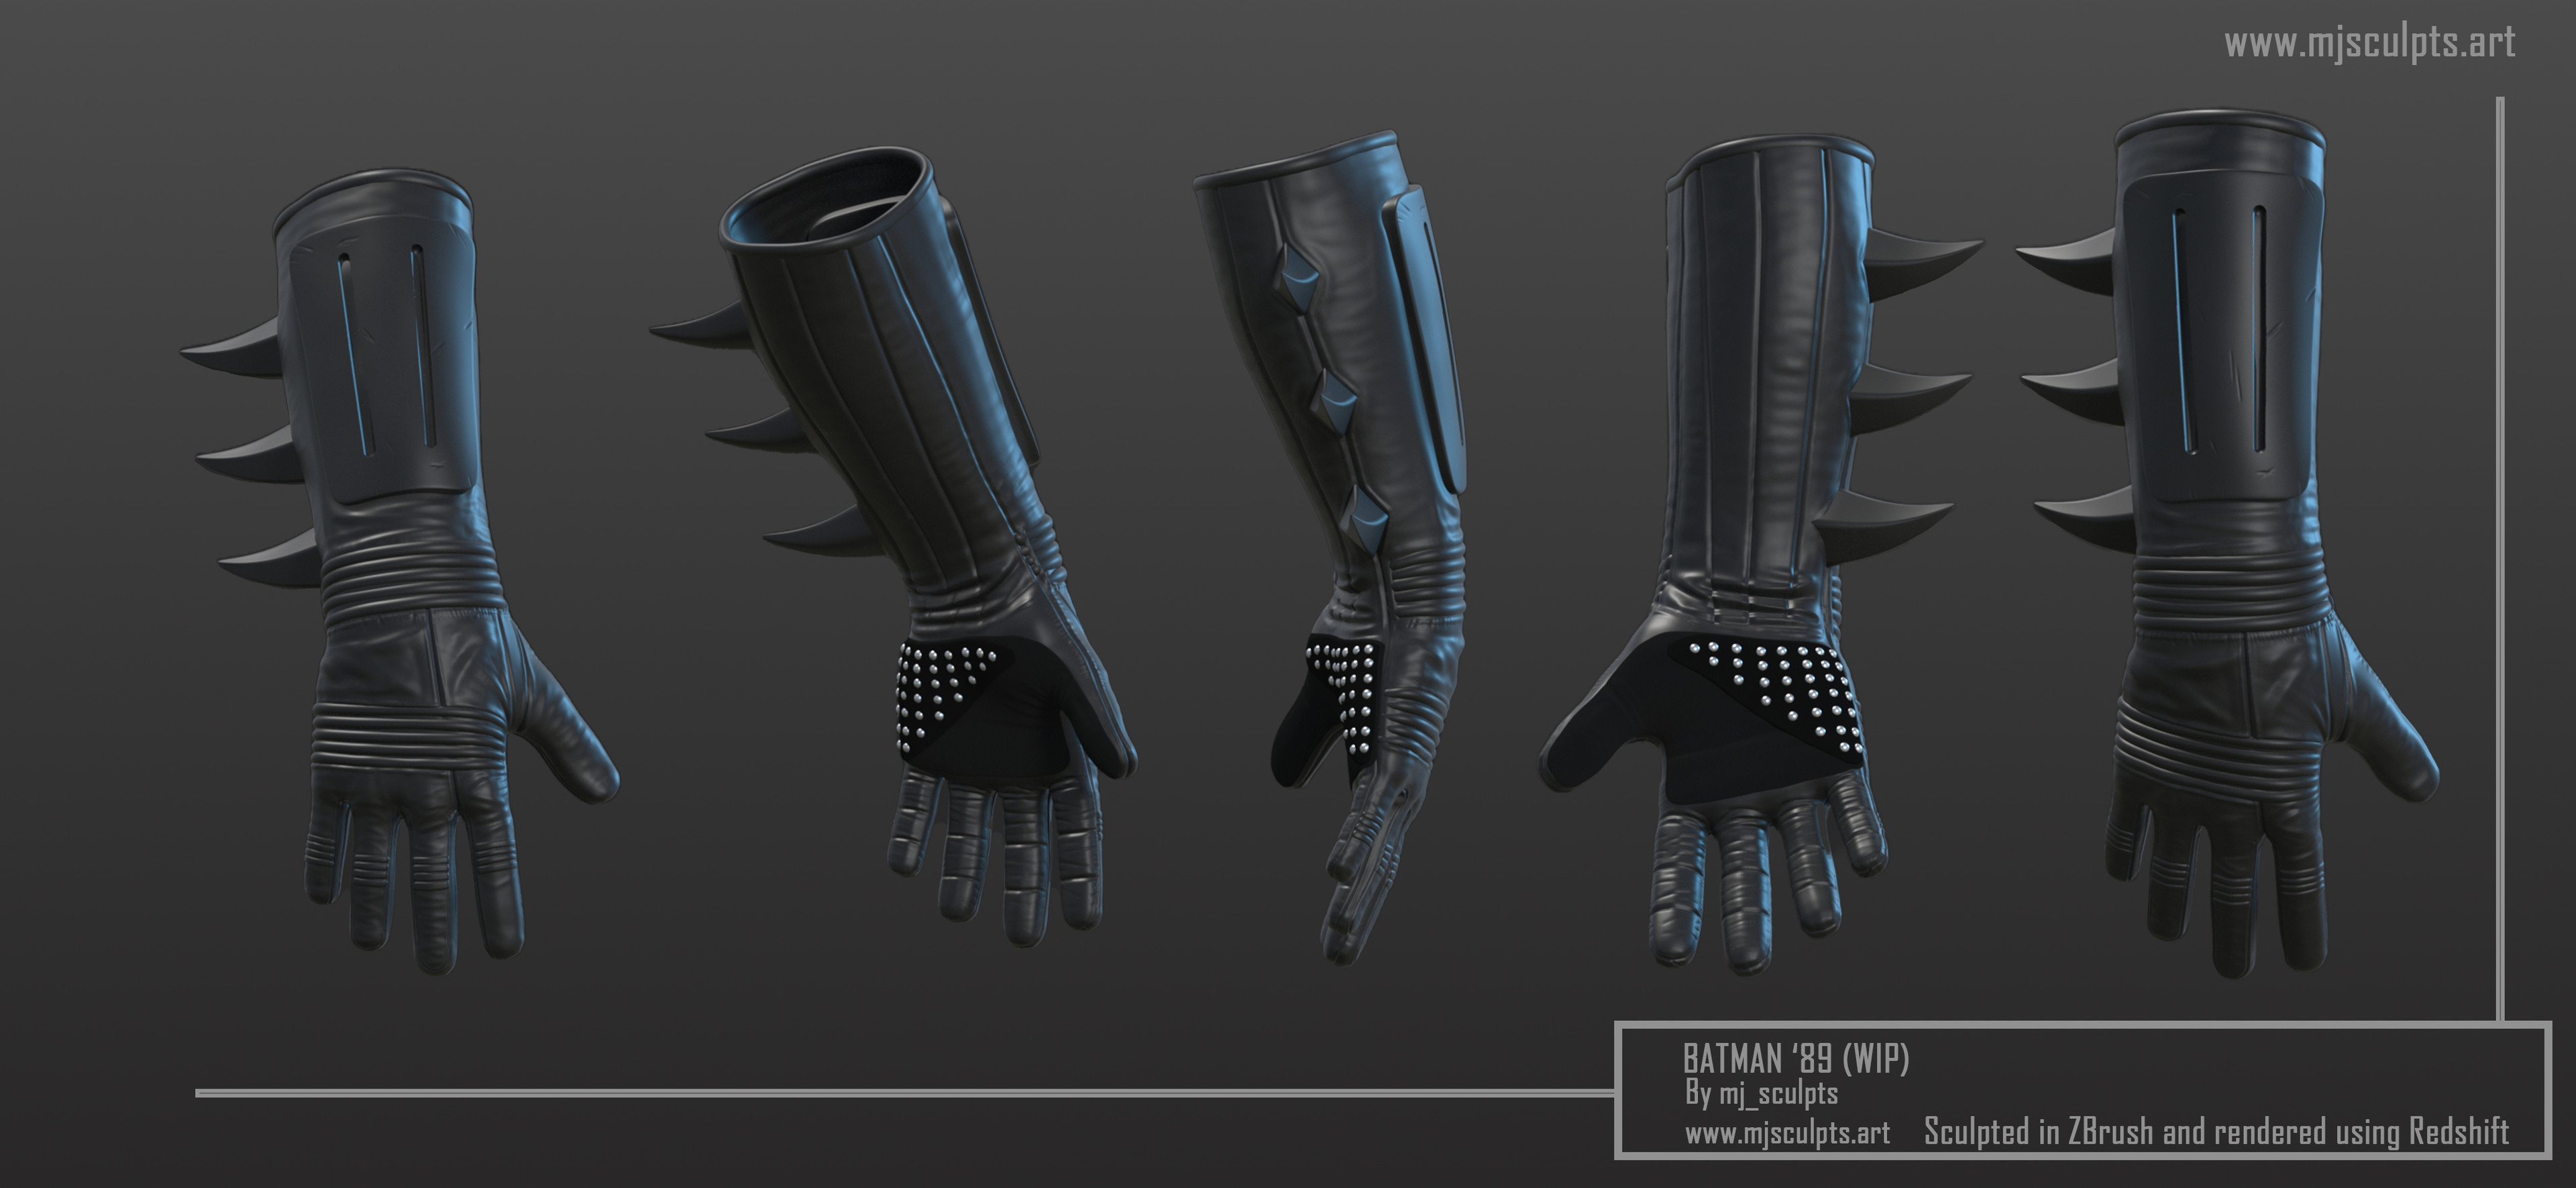 Details of the gloves (WIP)